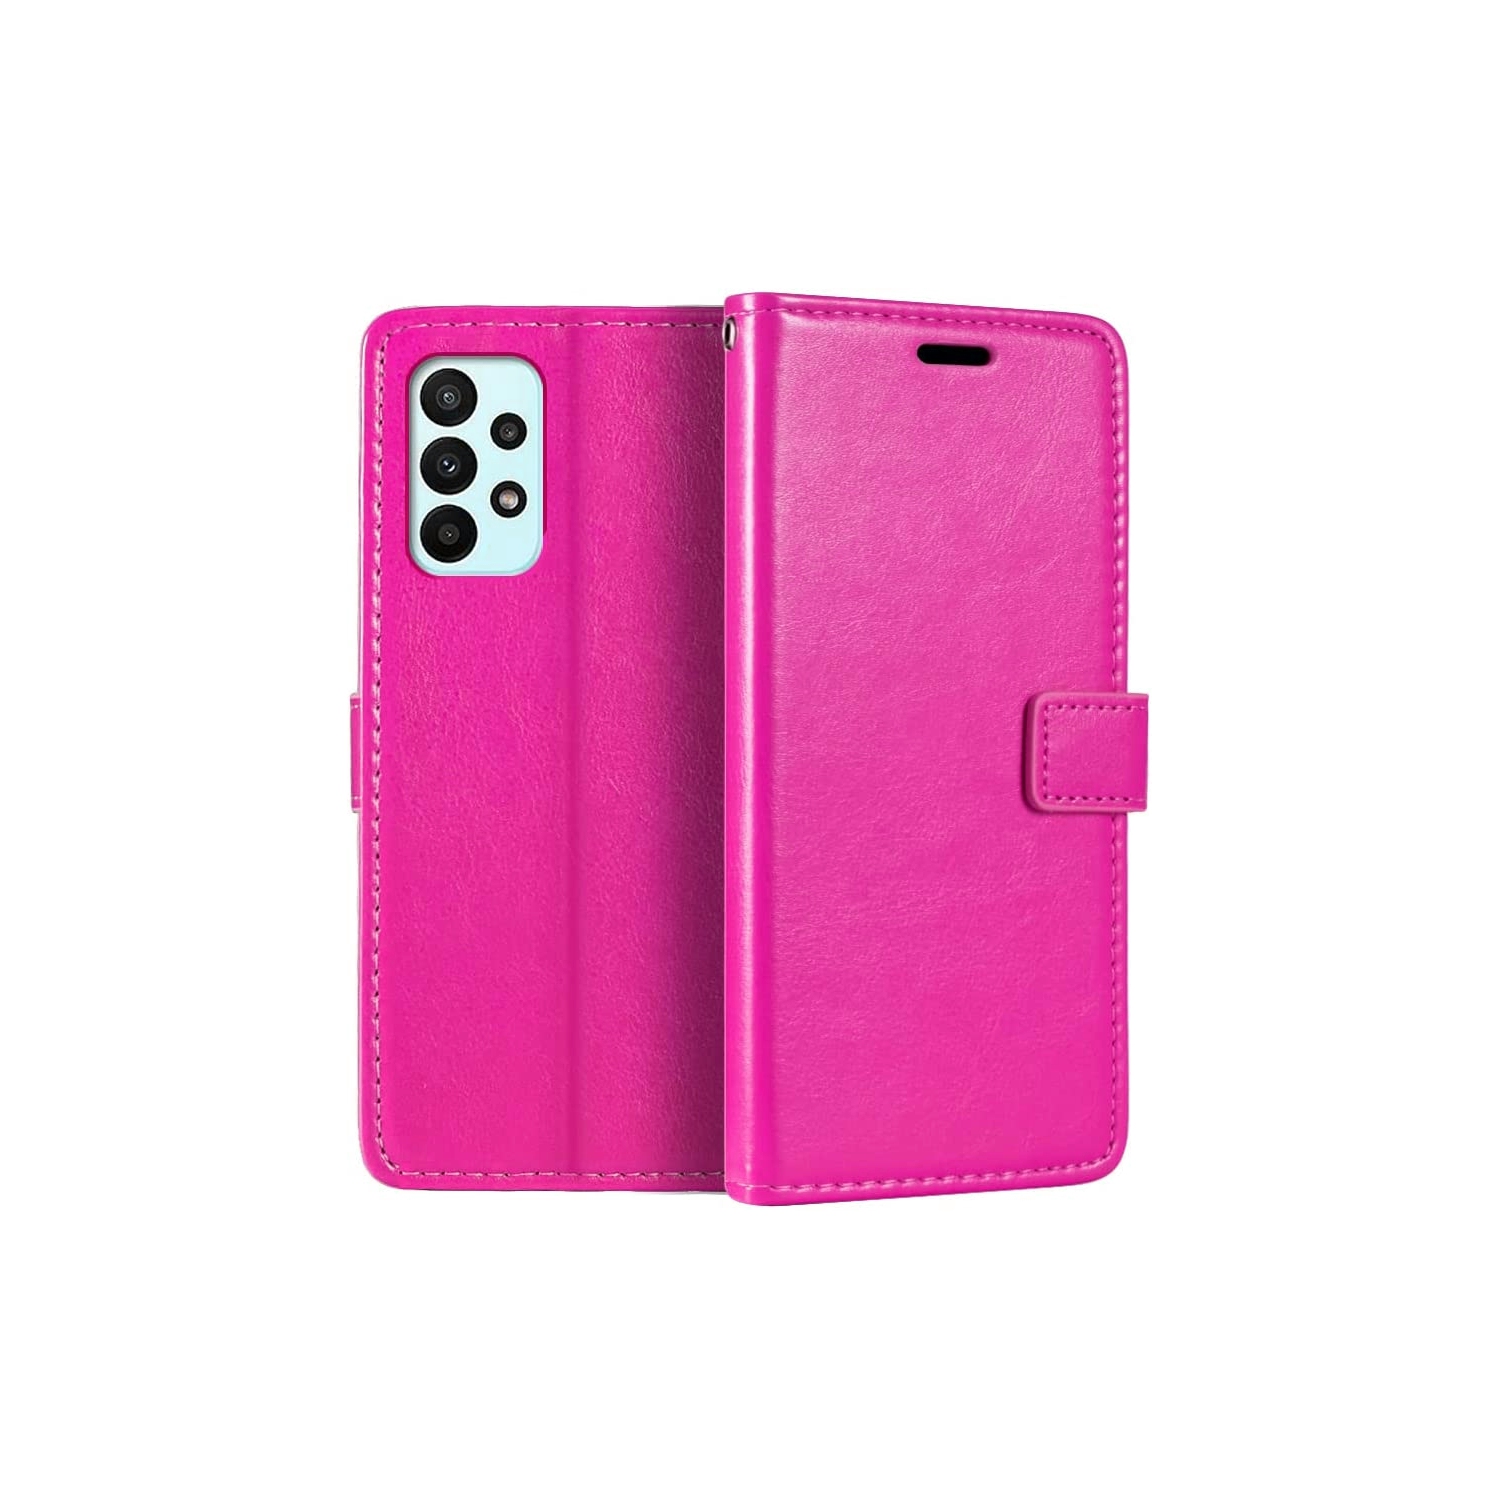 [CS] Samsung Galaxy A73 5G (2022) Case, Magnetic Leather Folio Wallet Flip Case Cover with Card Slot, Hot Pink